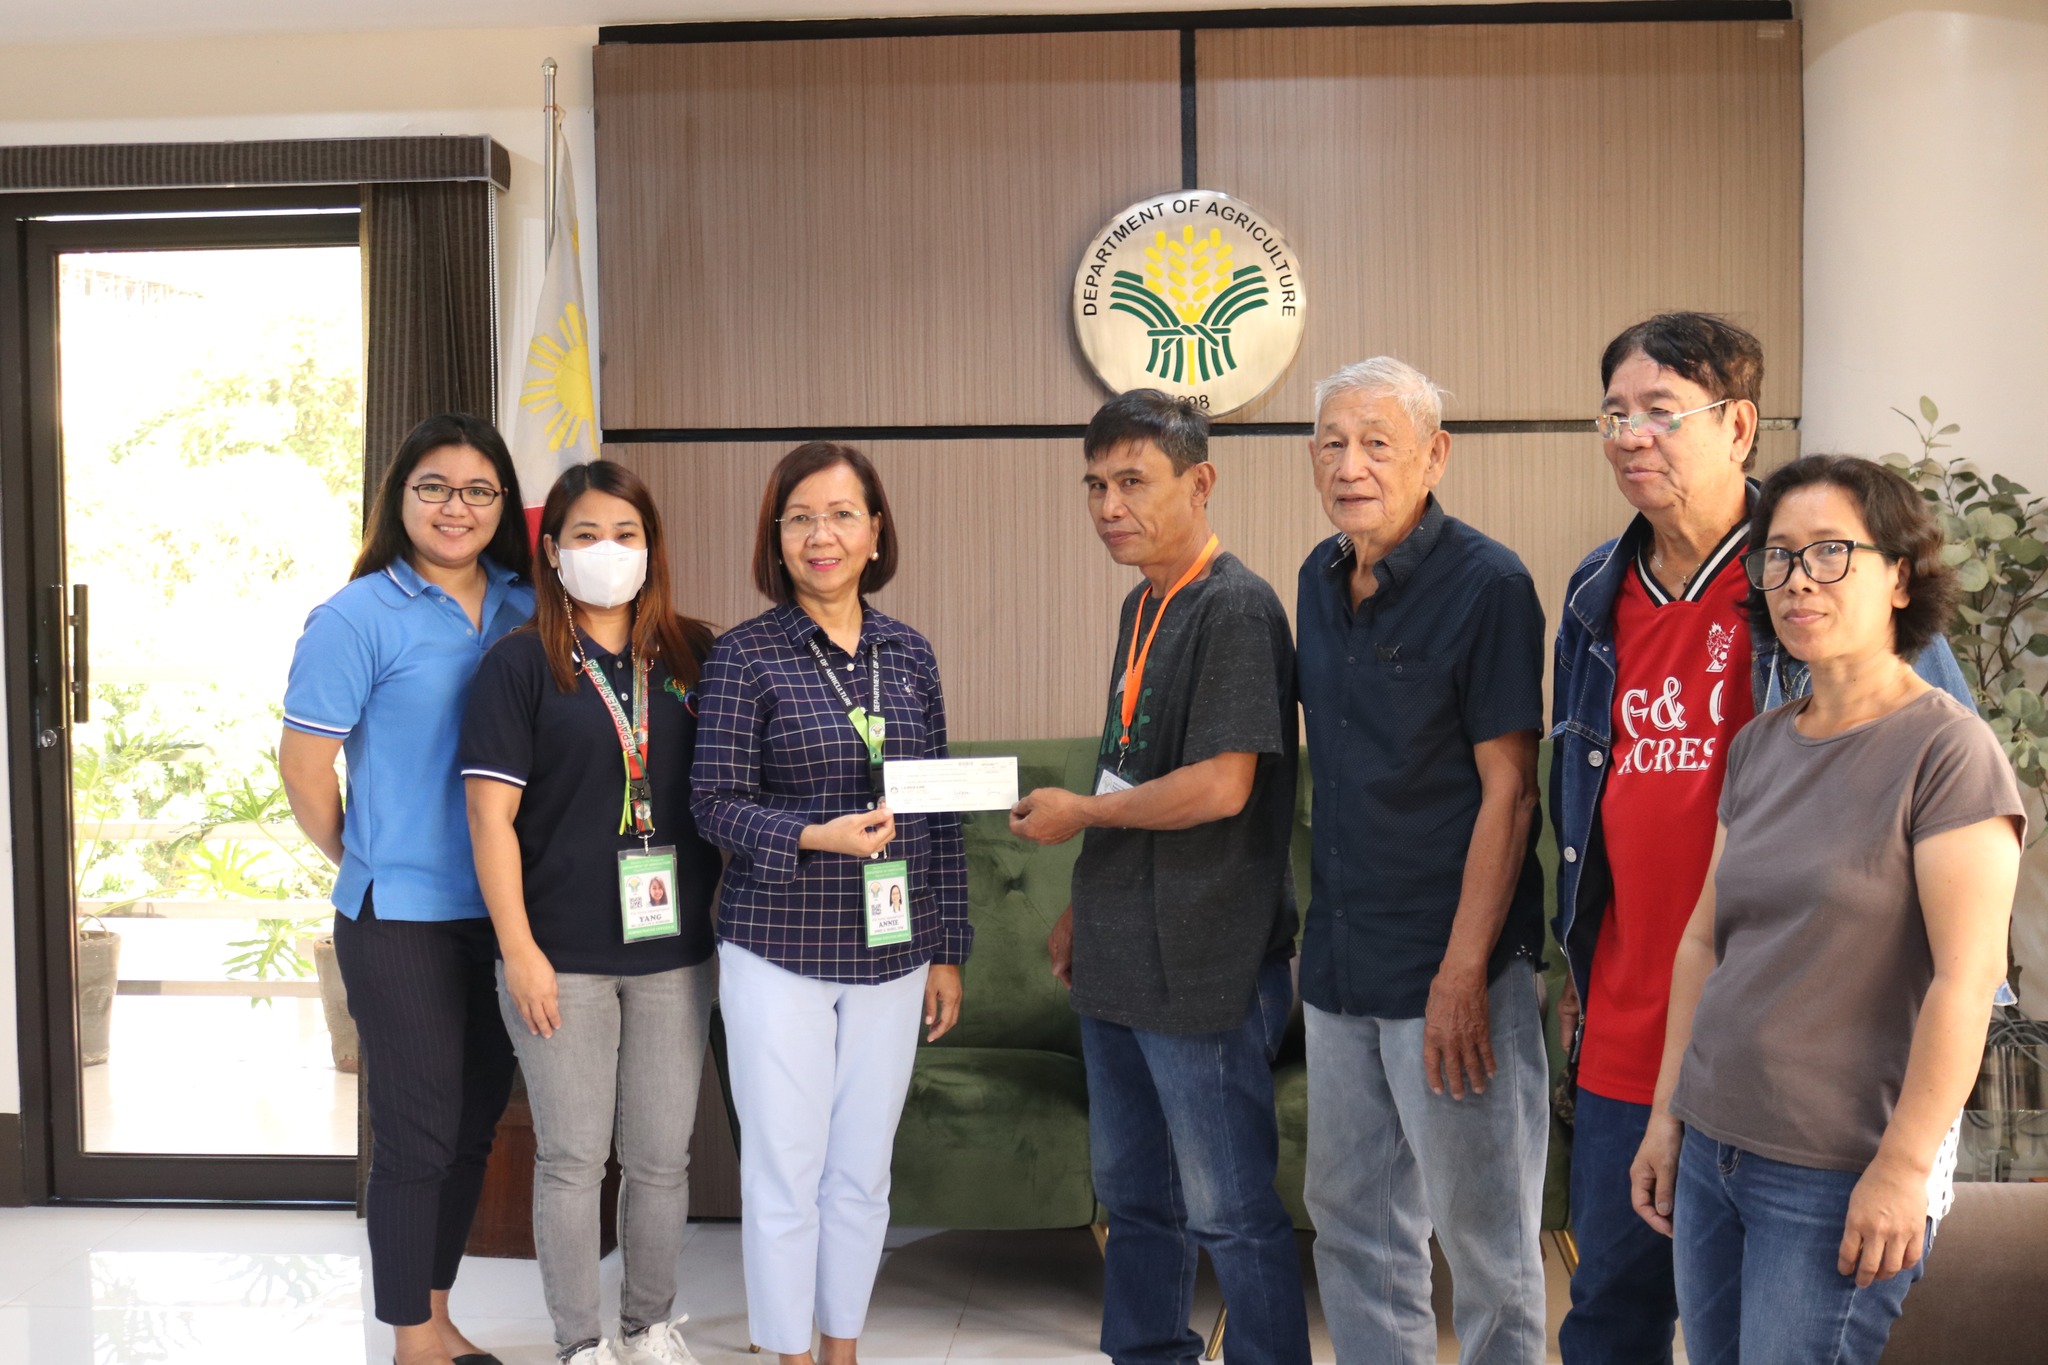 Look|| The Namnama Candon Multipurpose Cooperative in Candon City, Ilocos Sur receives today their 5.5 million cash allocation under the INSPIRE program of the Department of Agriculture